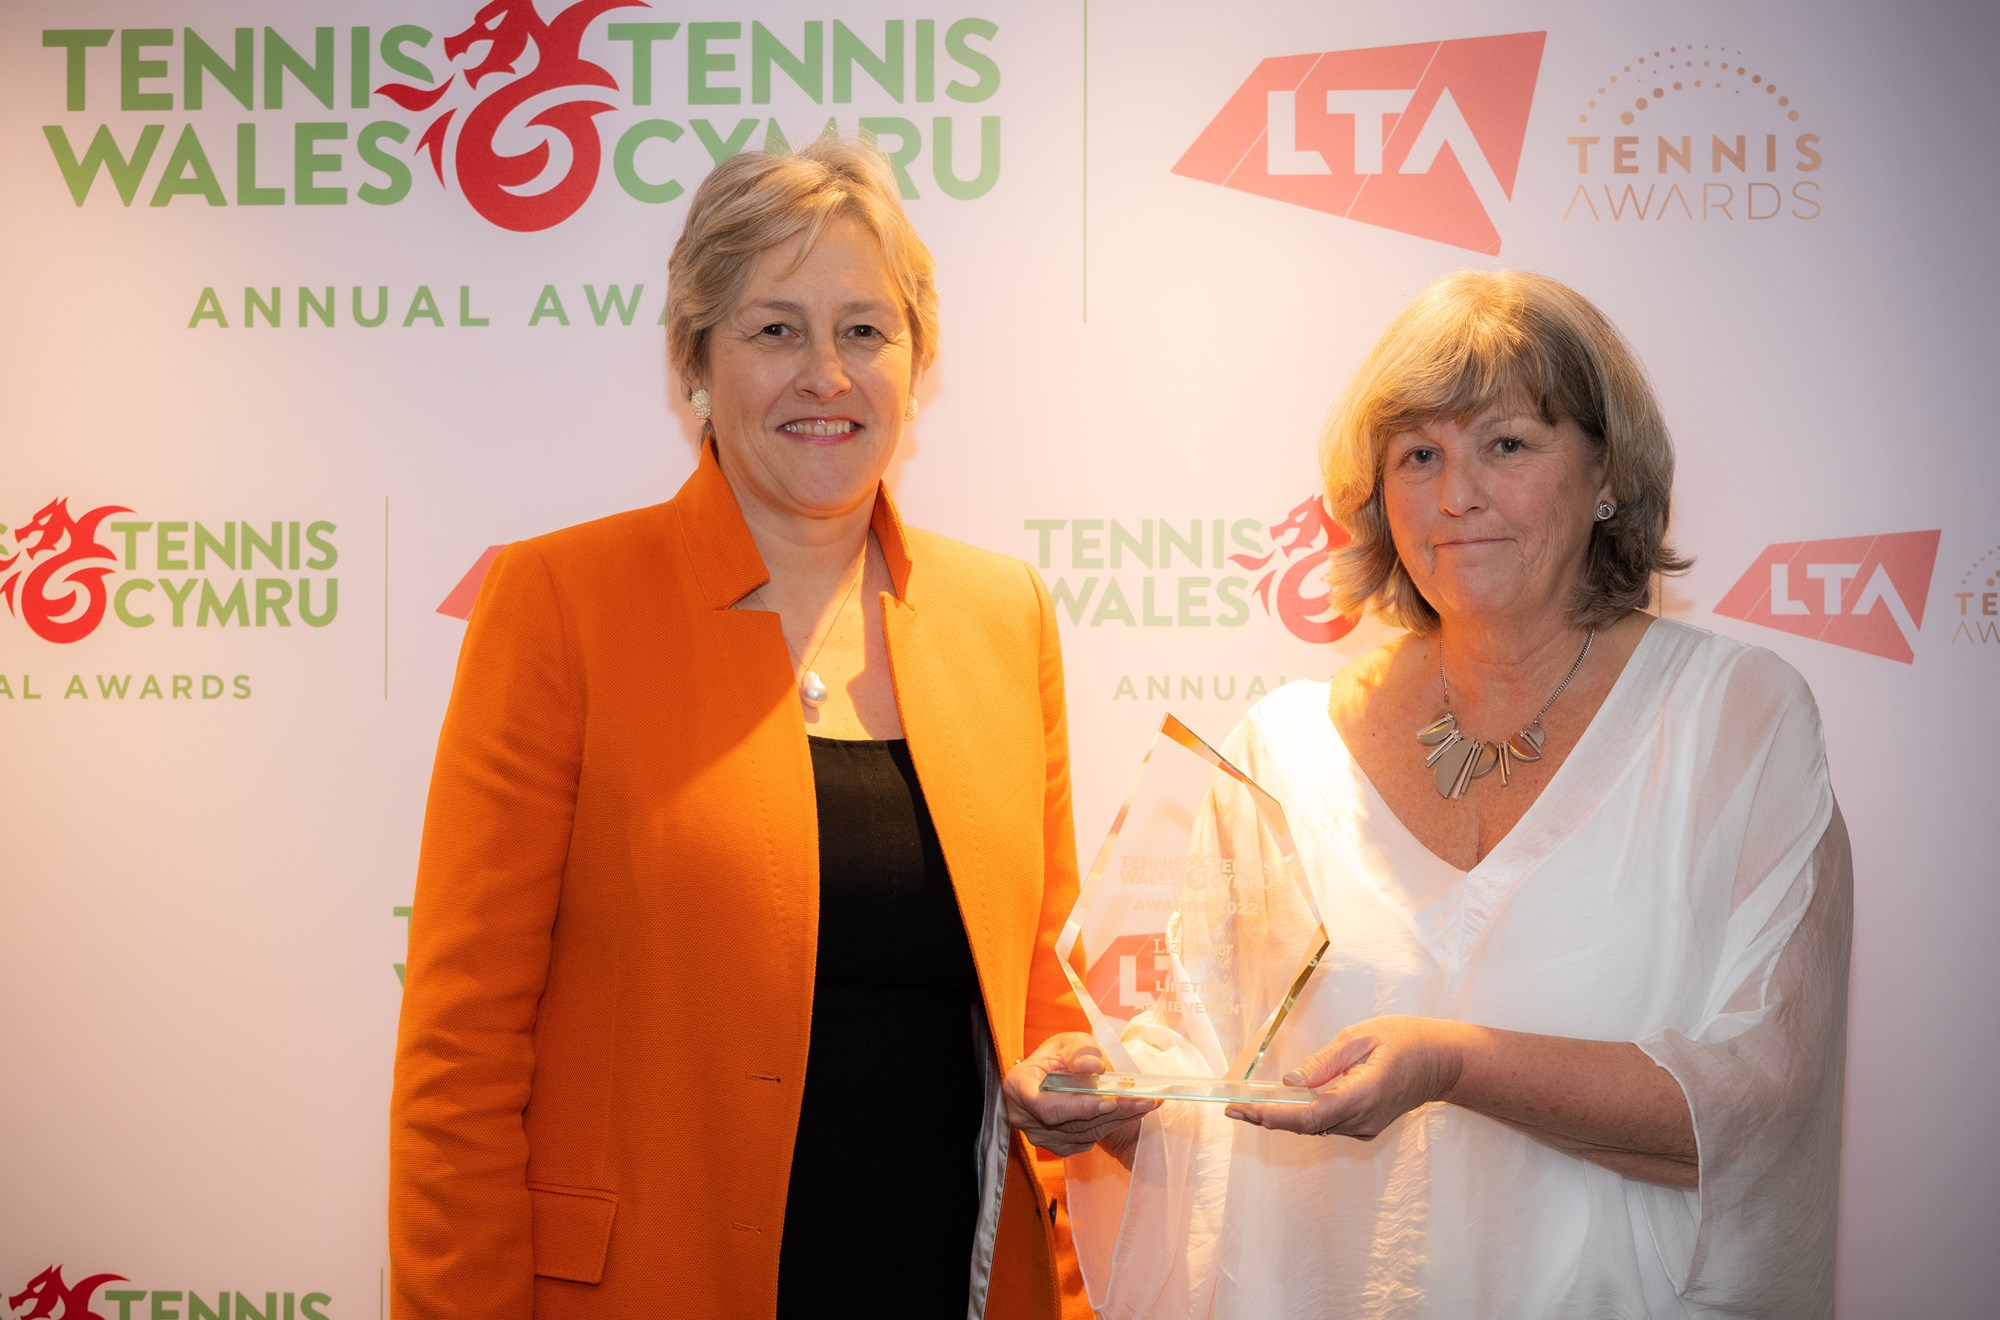 Two women receving a tennis award at the wales ceremony 